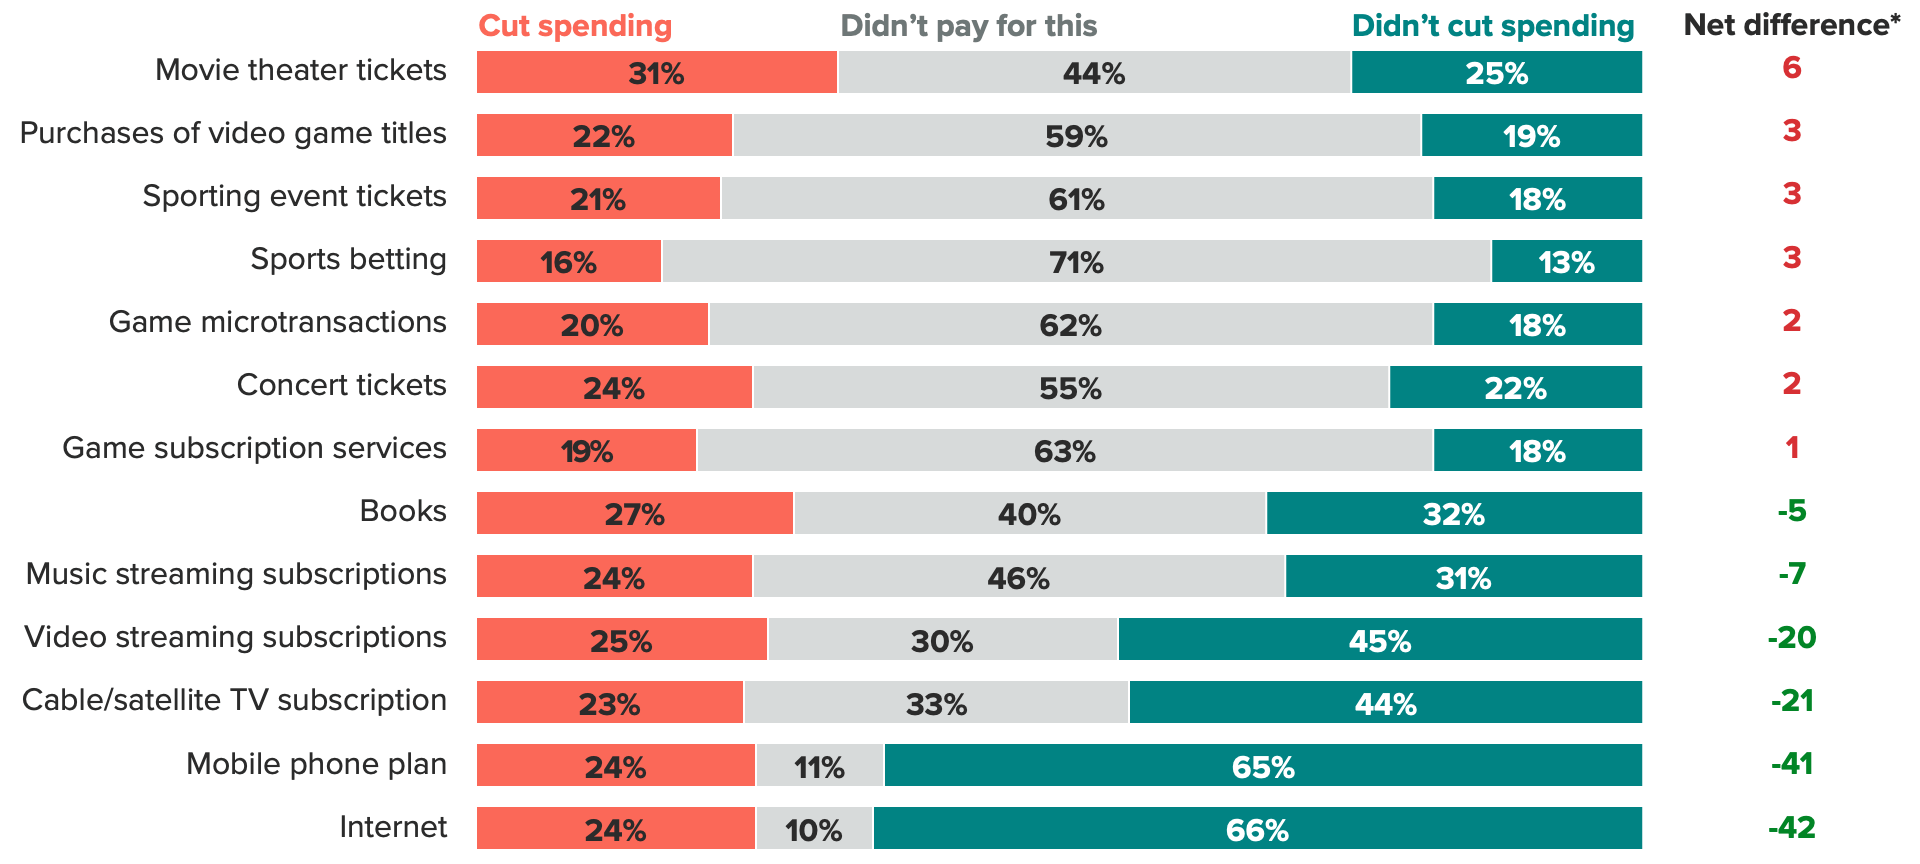 Bar chart of the share of U.S. adults who said whether they've cut spending in each category in the past 12 months due to inflation, showing the hardest-hit categories were one-off entertainment expenses like purchases of movie tickets, video games and sporting event tickets.